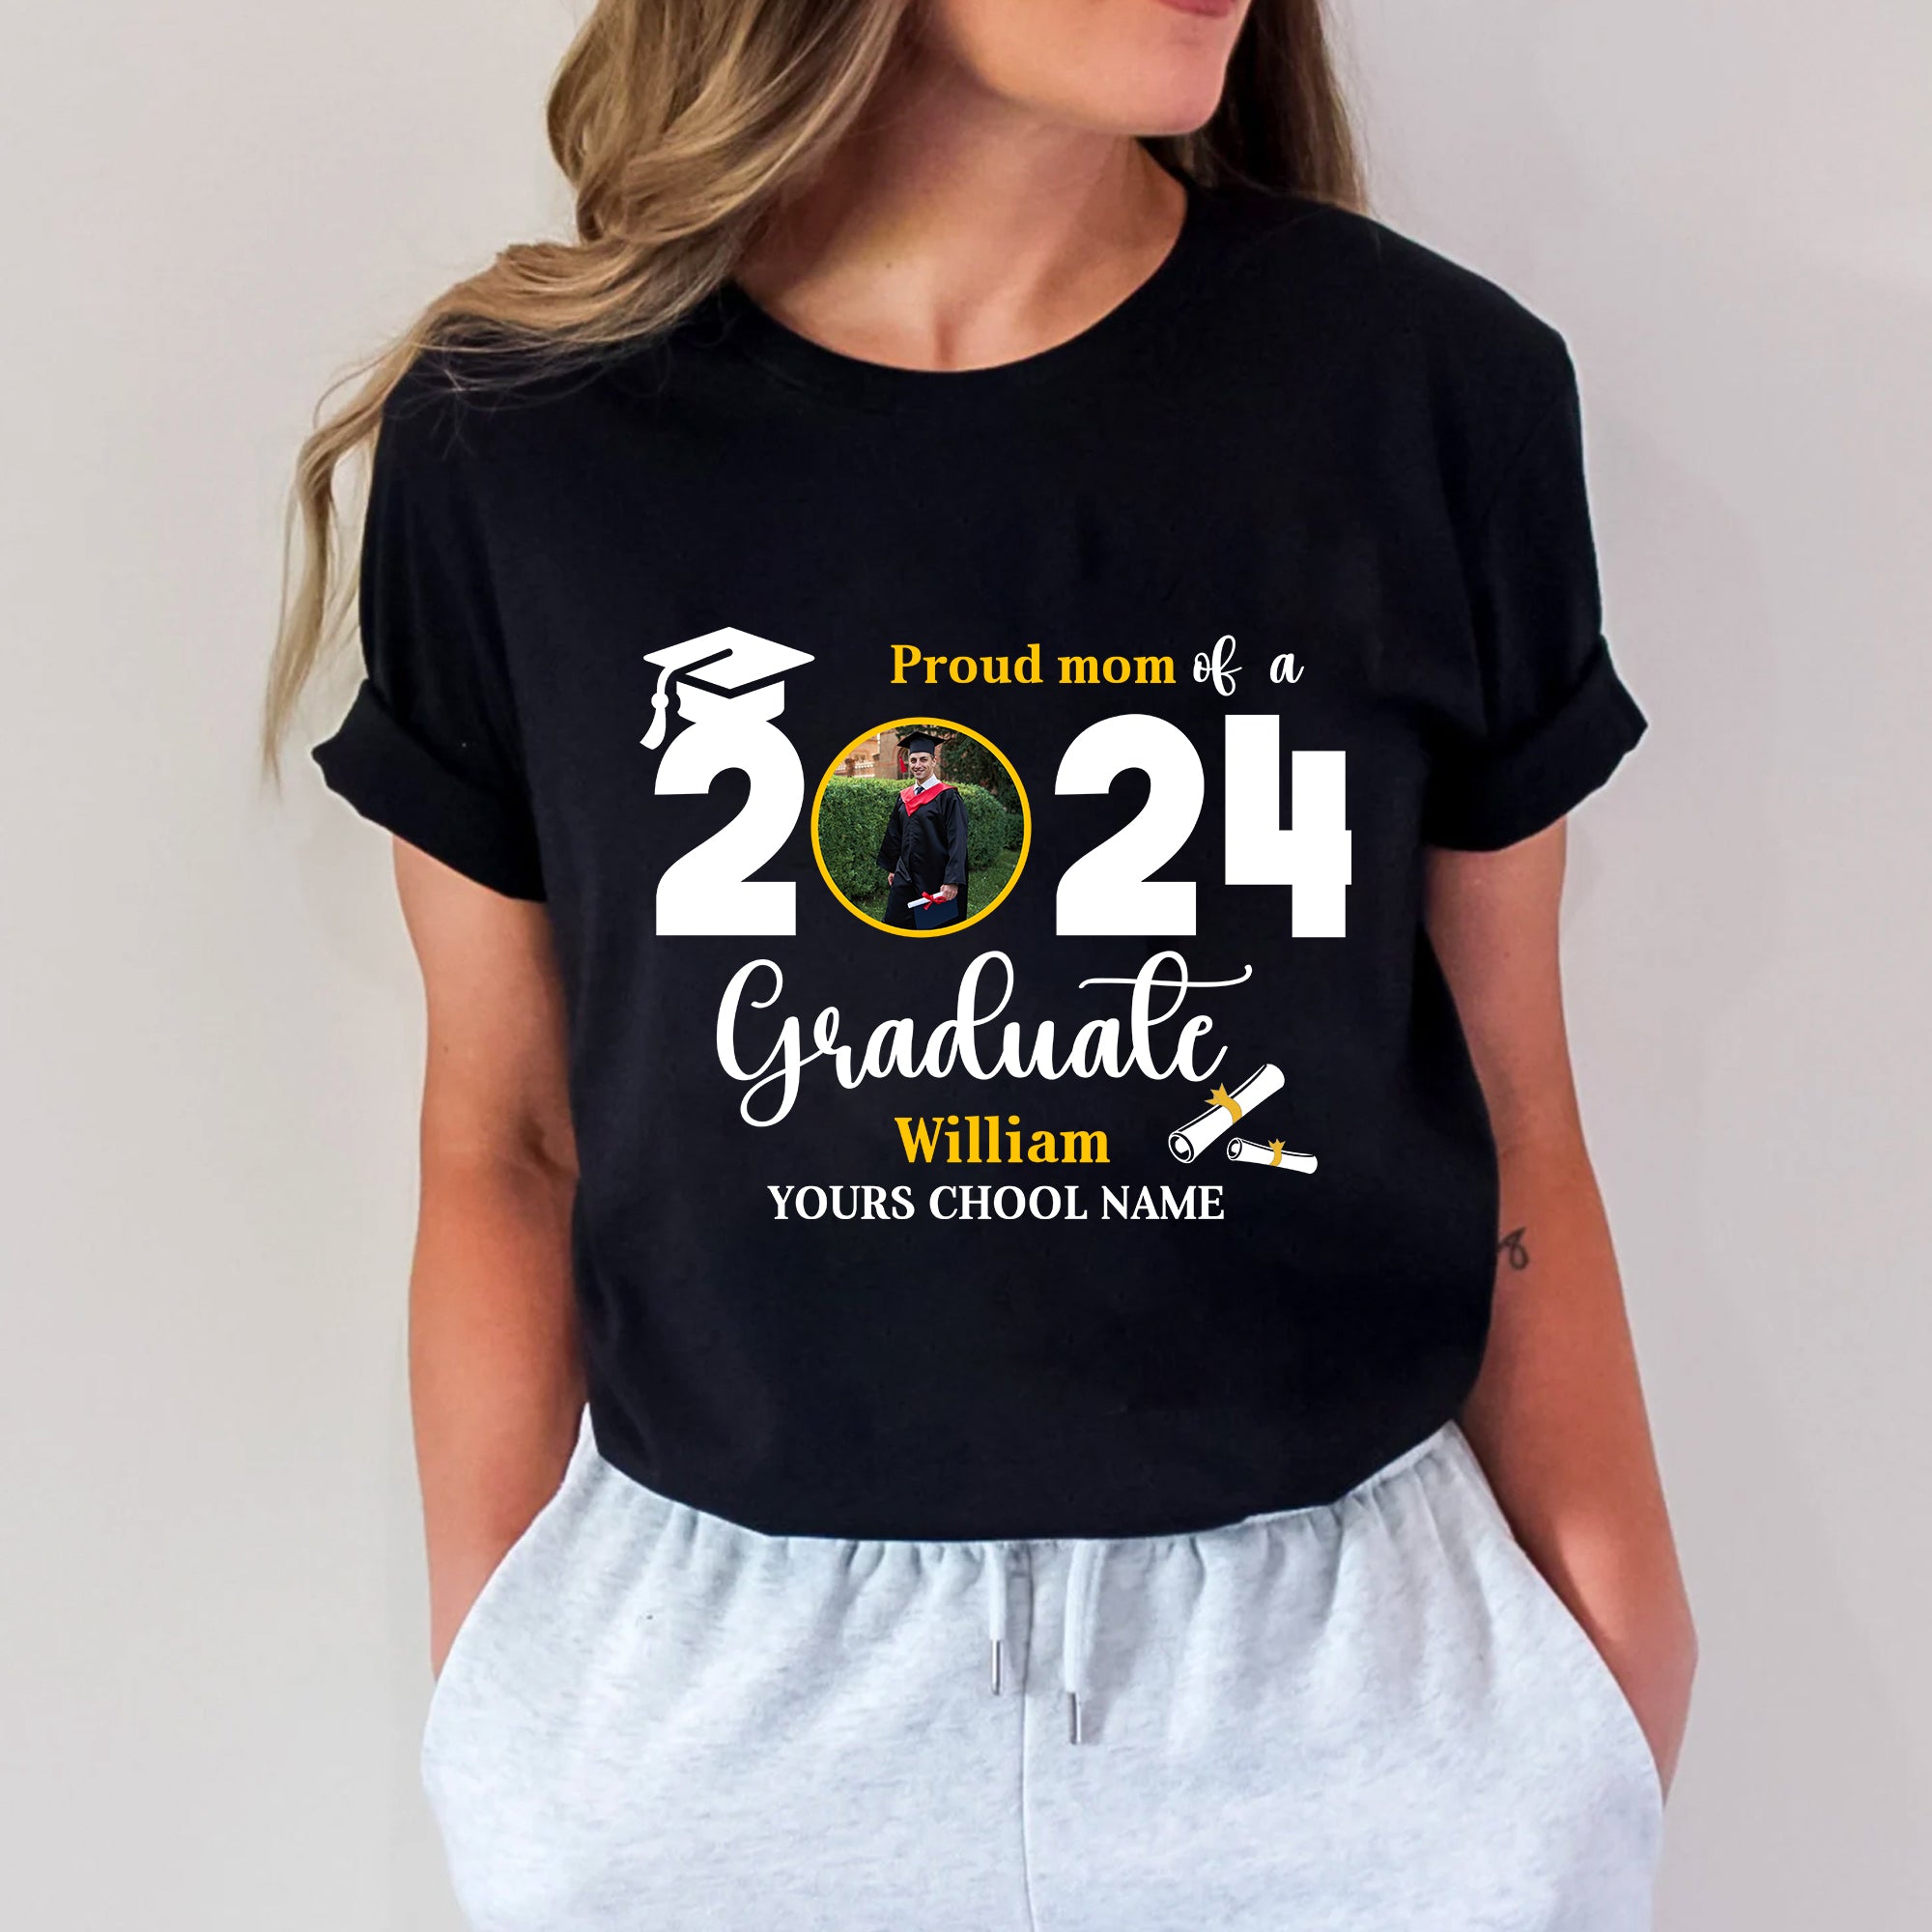 2024 Graduate, Custom Photo And Texts - Gift For Graduation - Personalized T-Shirt